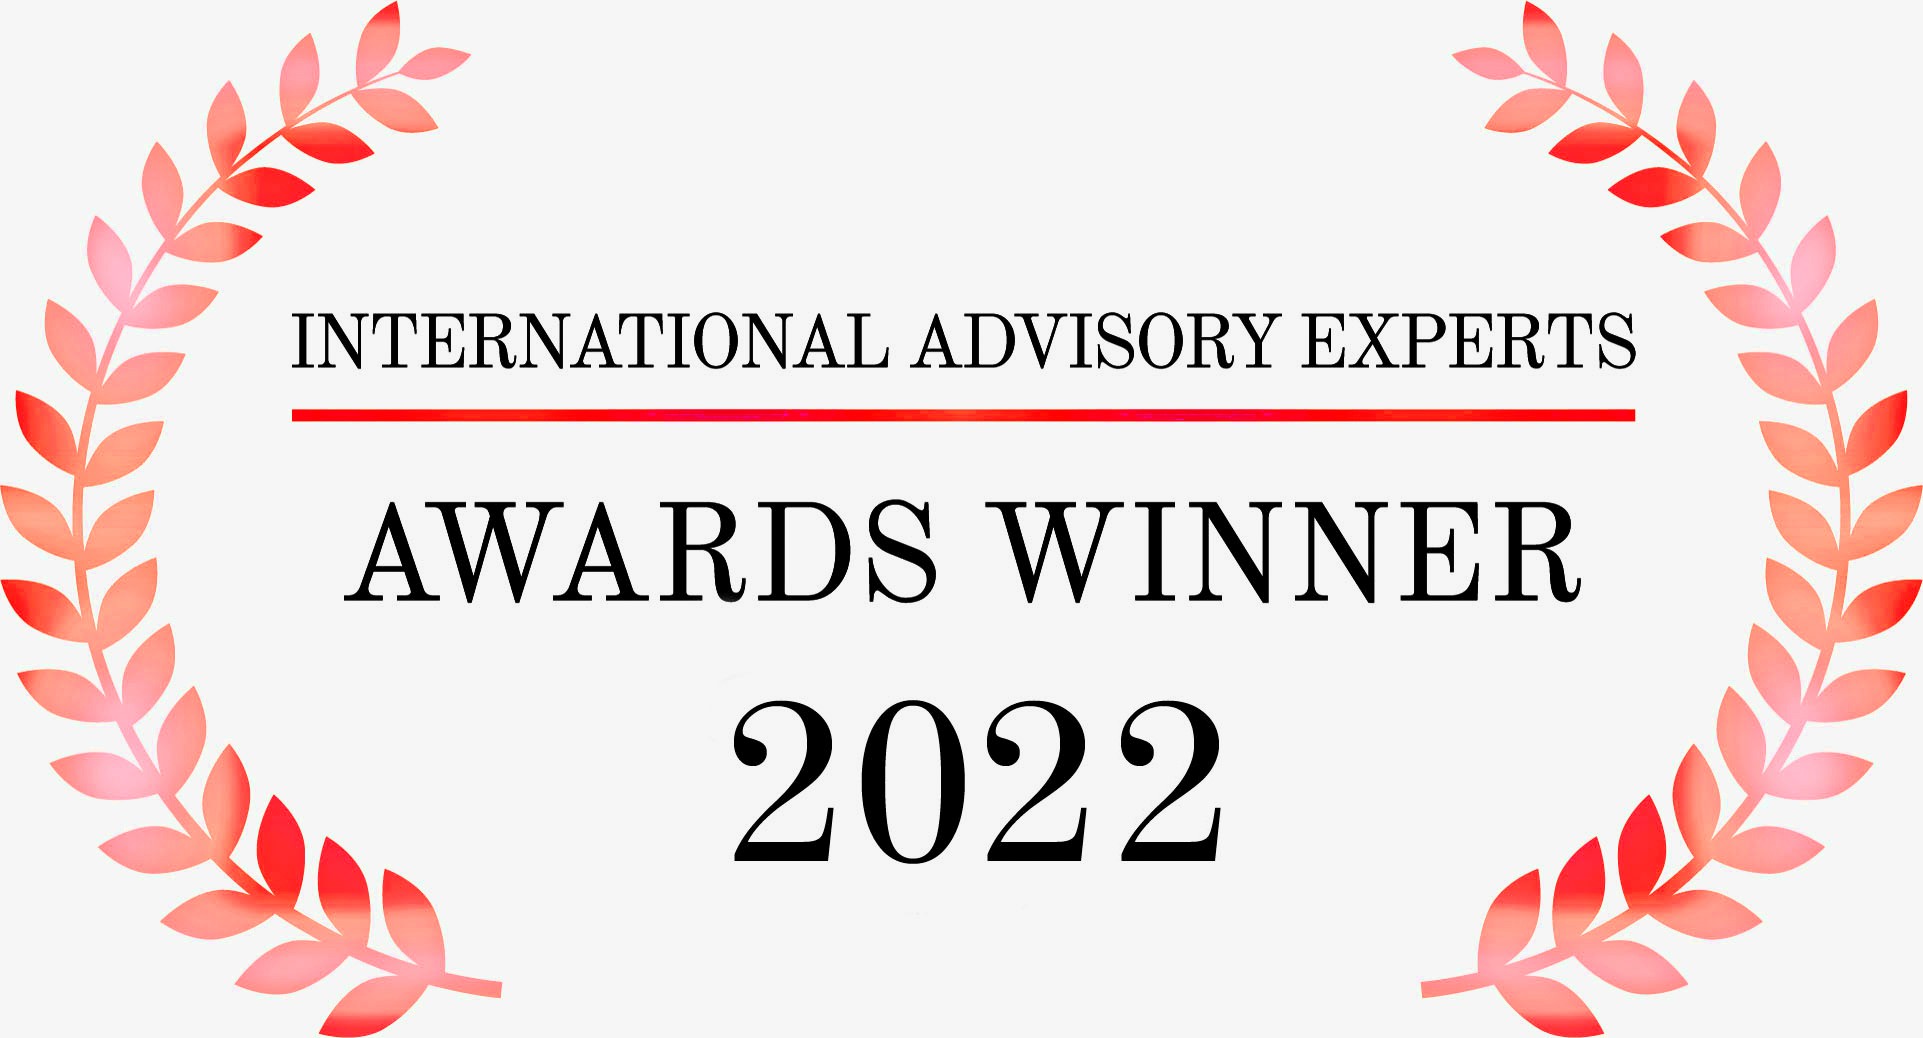 Award Winner in M&A of the Year for Hong Kong by International Advisory Experts, 2022